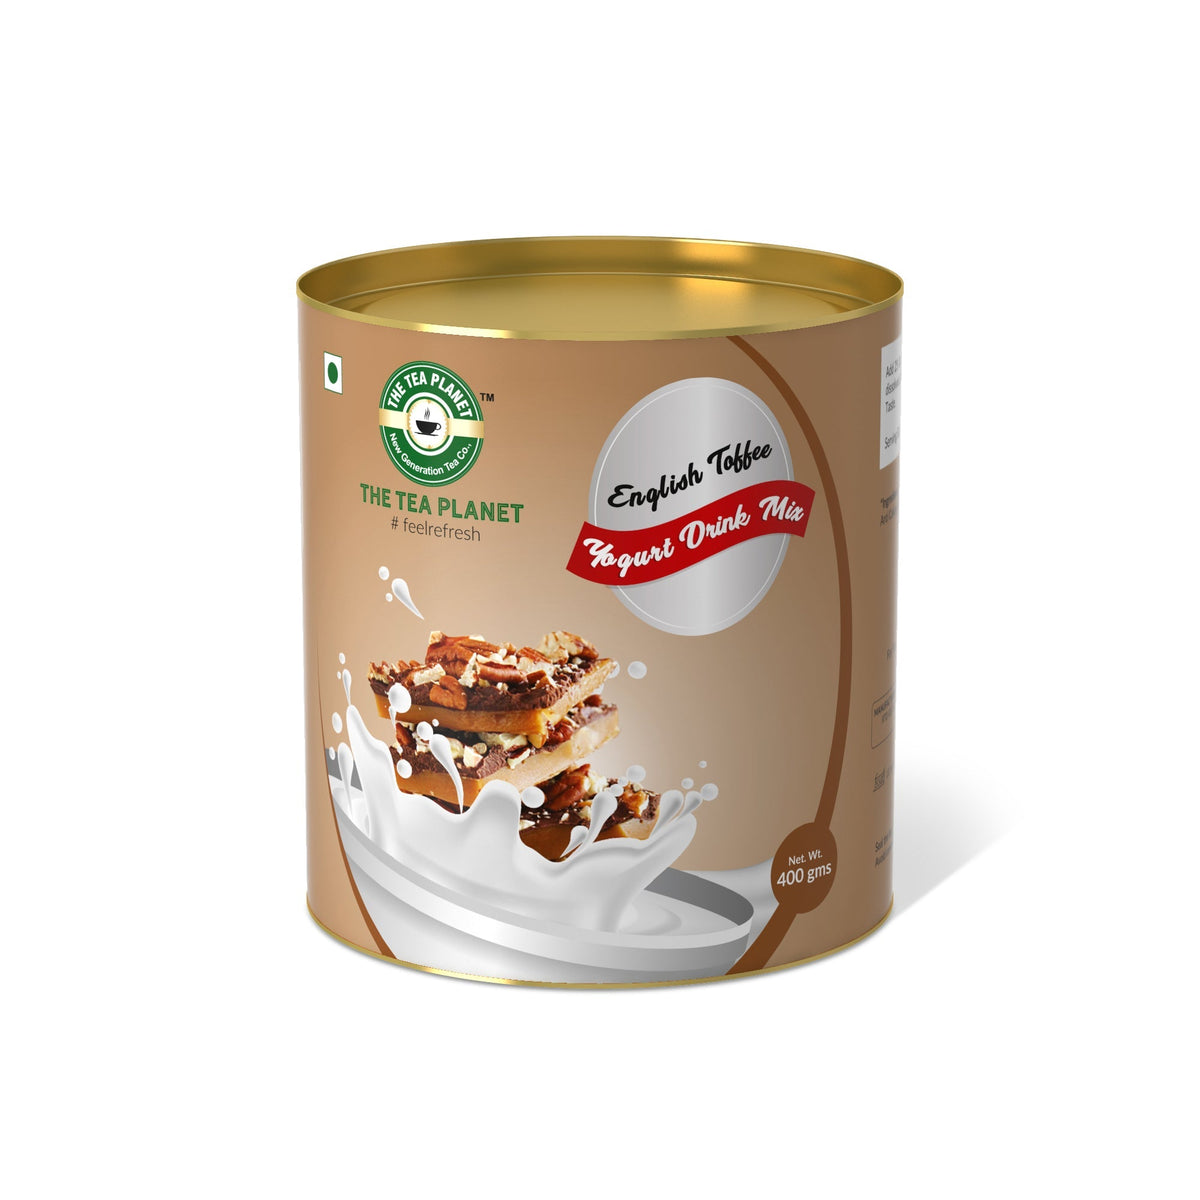 English Toffee Flavored Lassi Mix